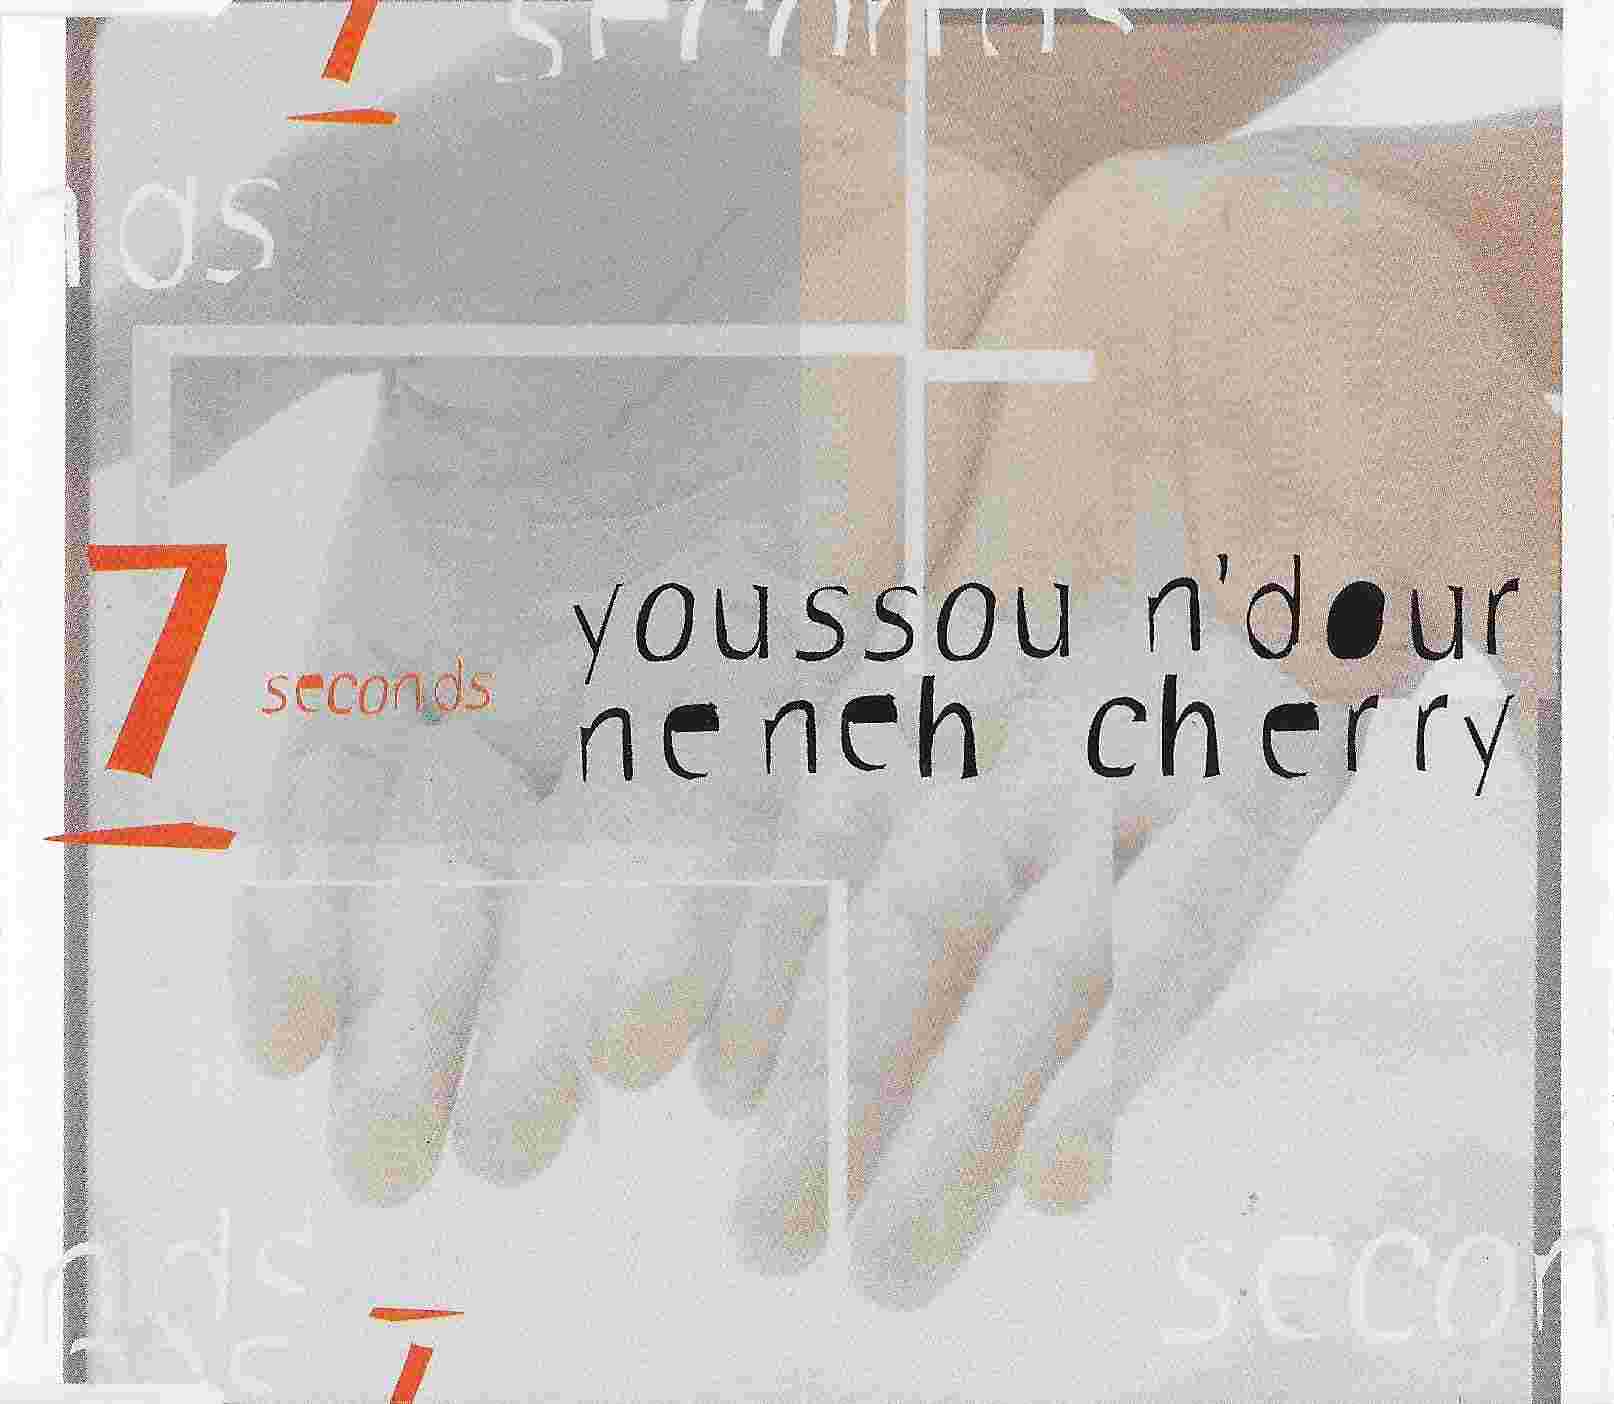 Picture of 660254 2 7 seconds by artist Youssou D'Dour / Neneh Cherry